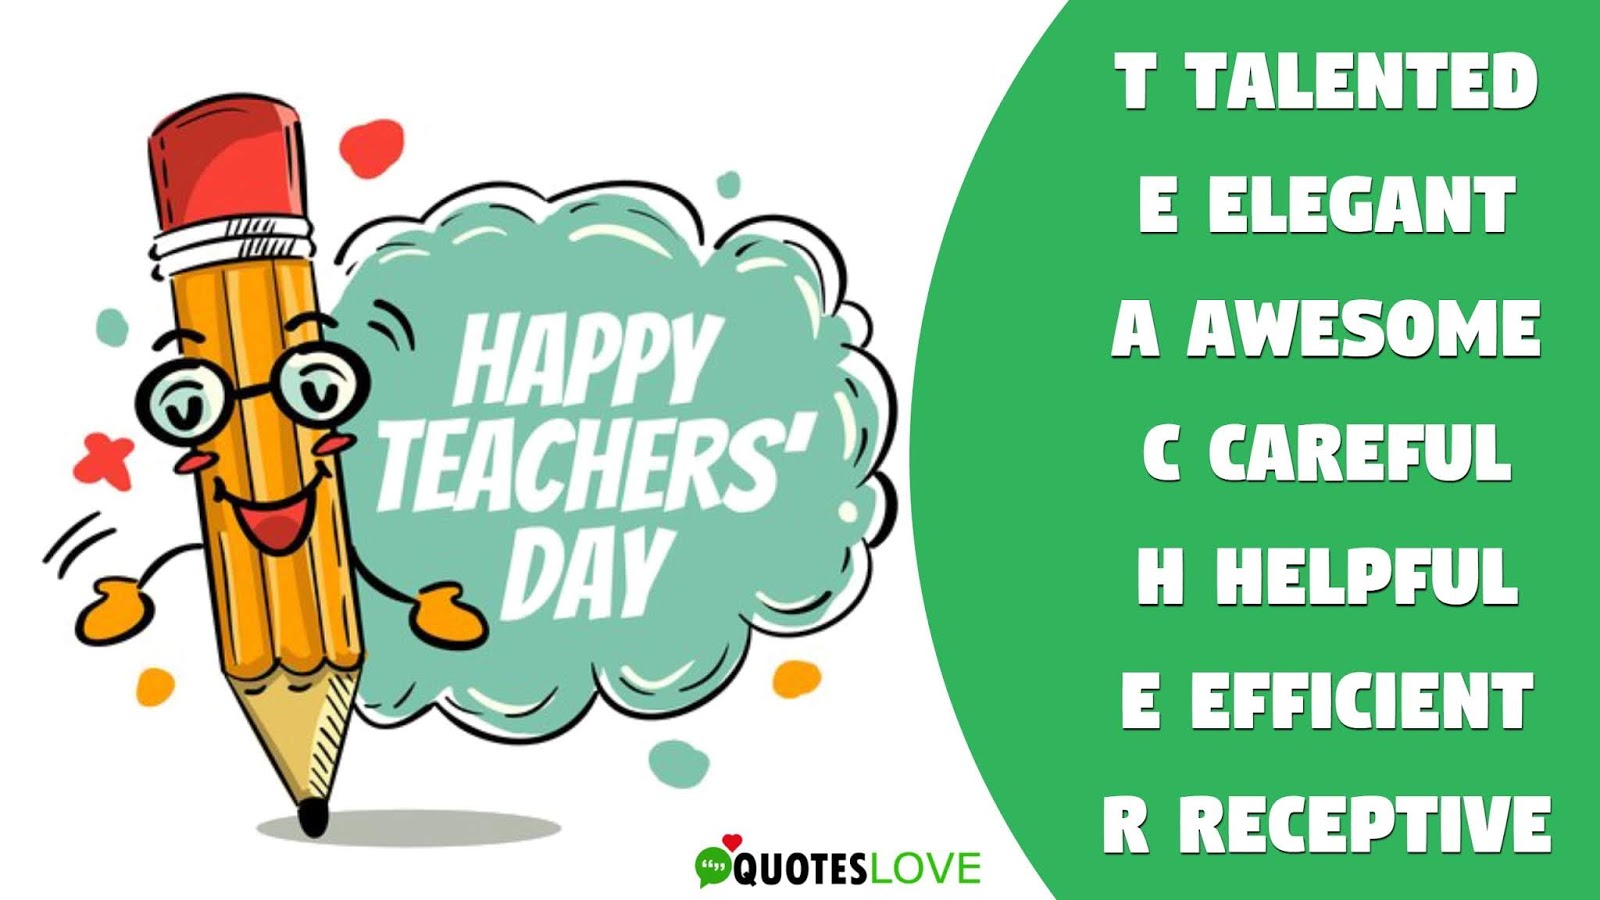 (New) Happy Teachers Day Quotes, Status, Wishes, Images and Messages for Year 2019